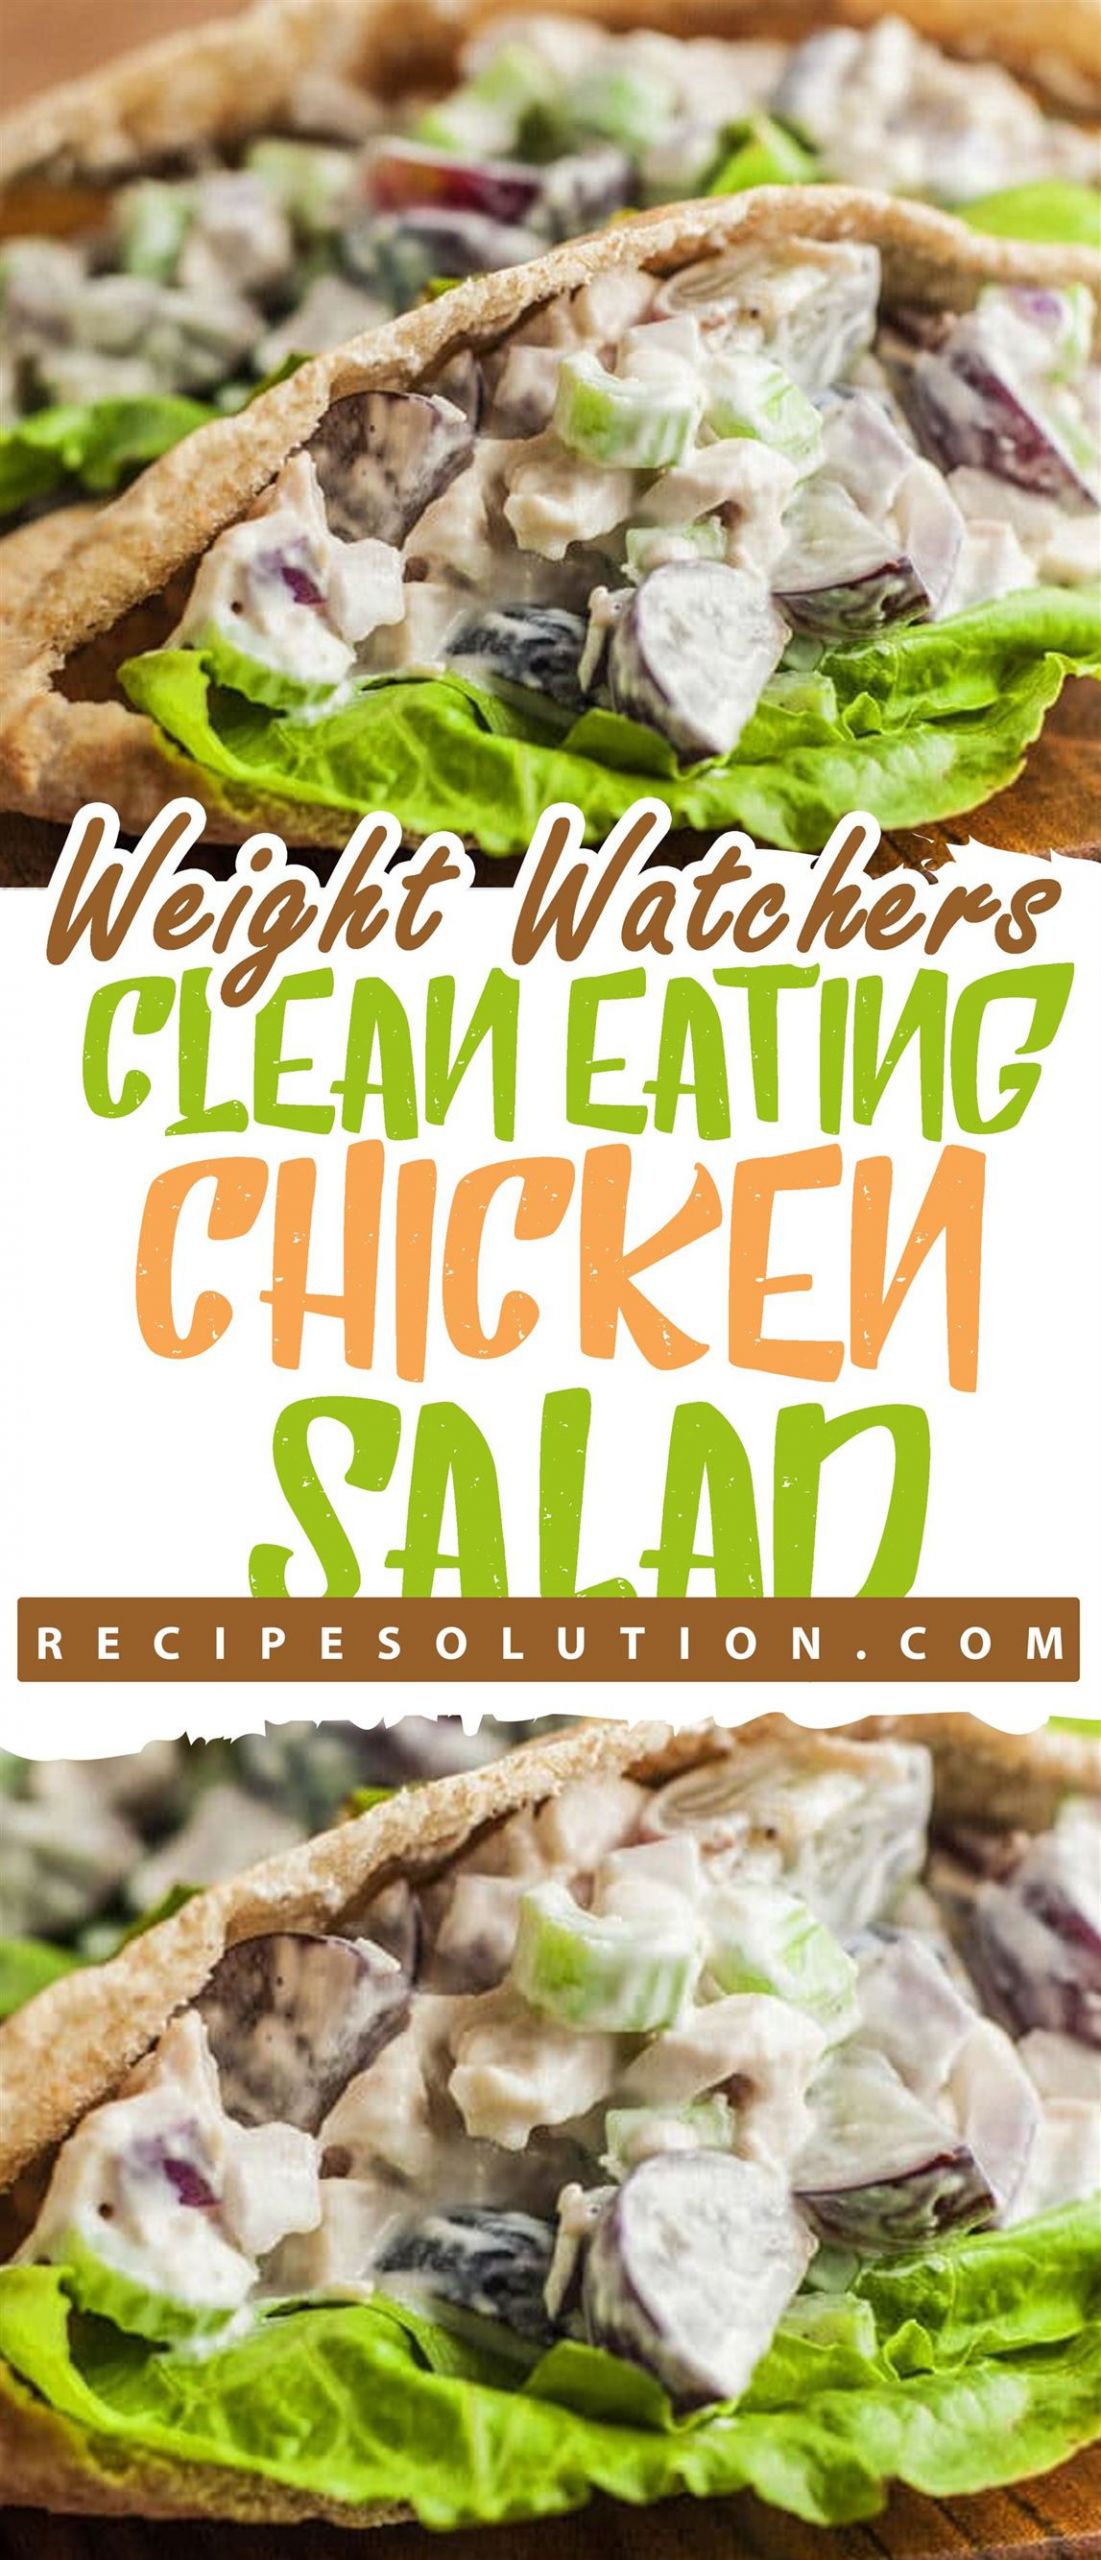 Clean Eating Chicken Salad
 Clean Eating Chicken Salad Recipe Solution